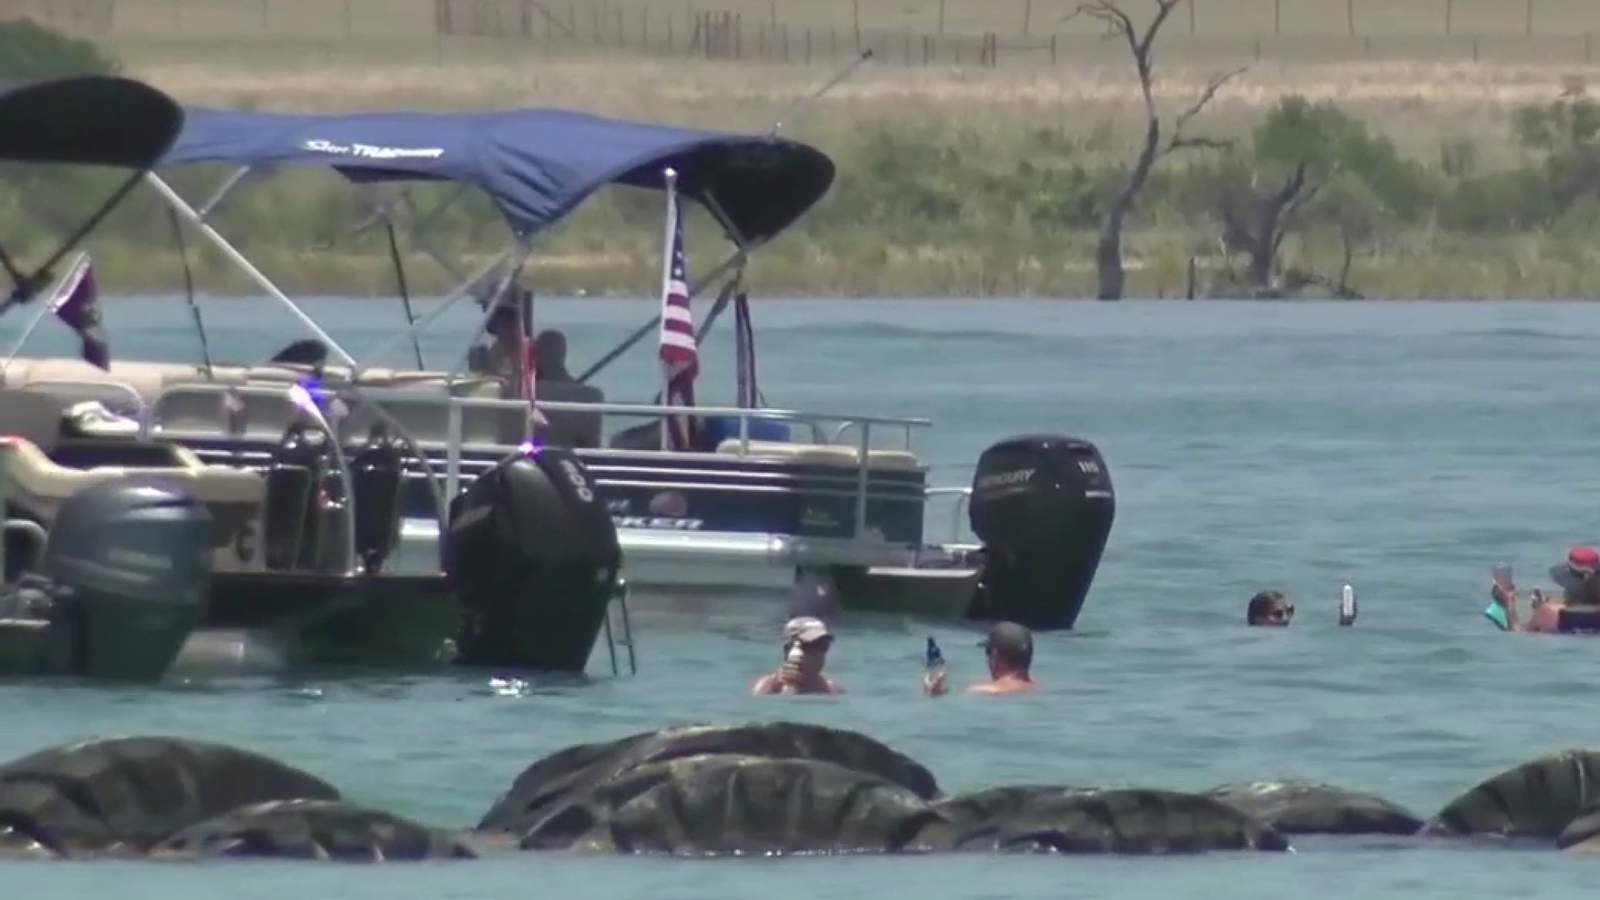 Firefighters dealing with increased traffic at Canyon Lake during 4th of July weekend